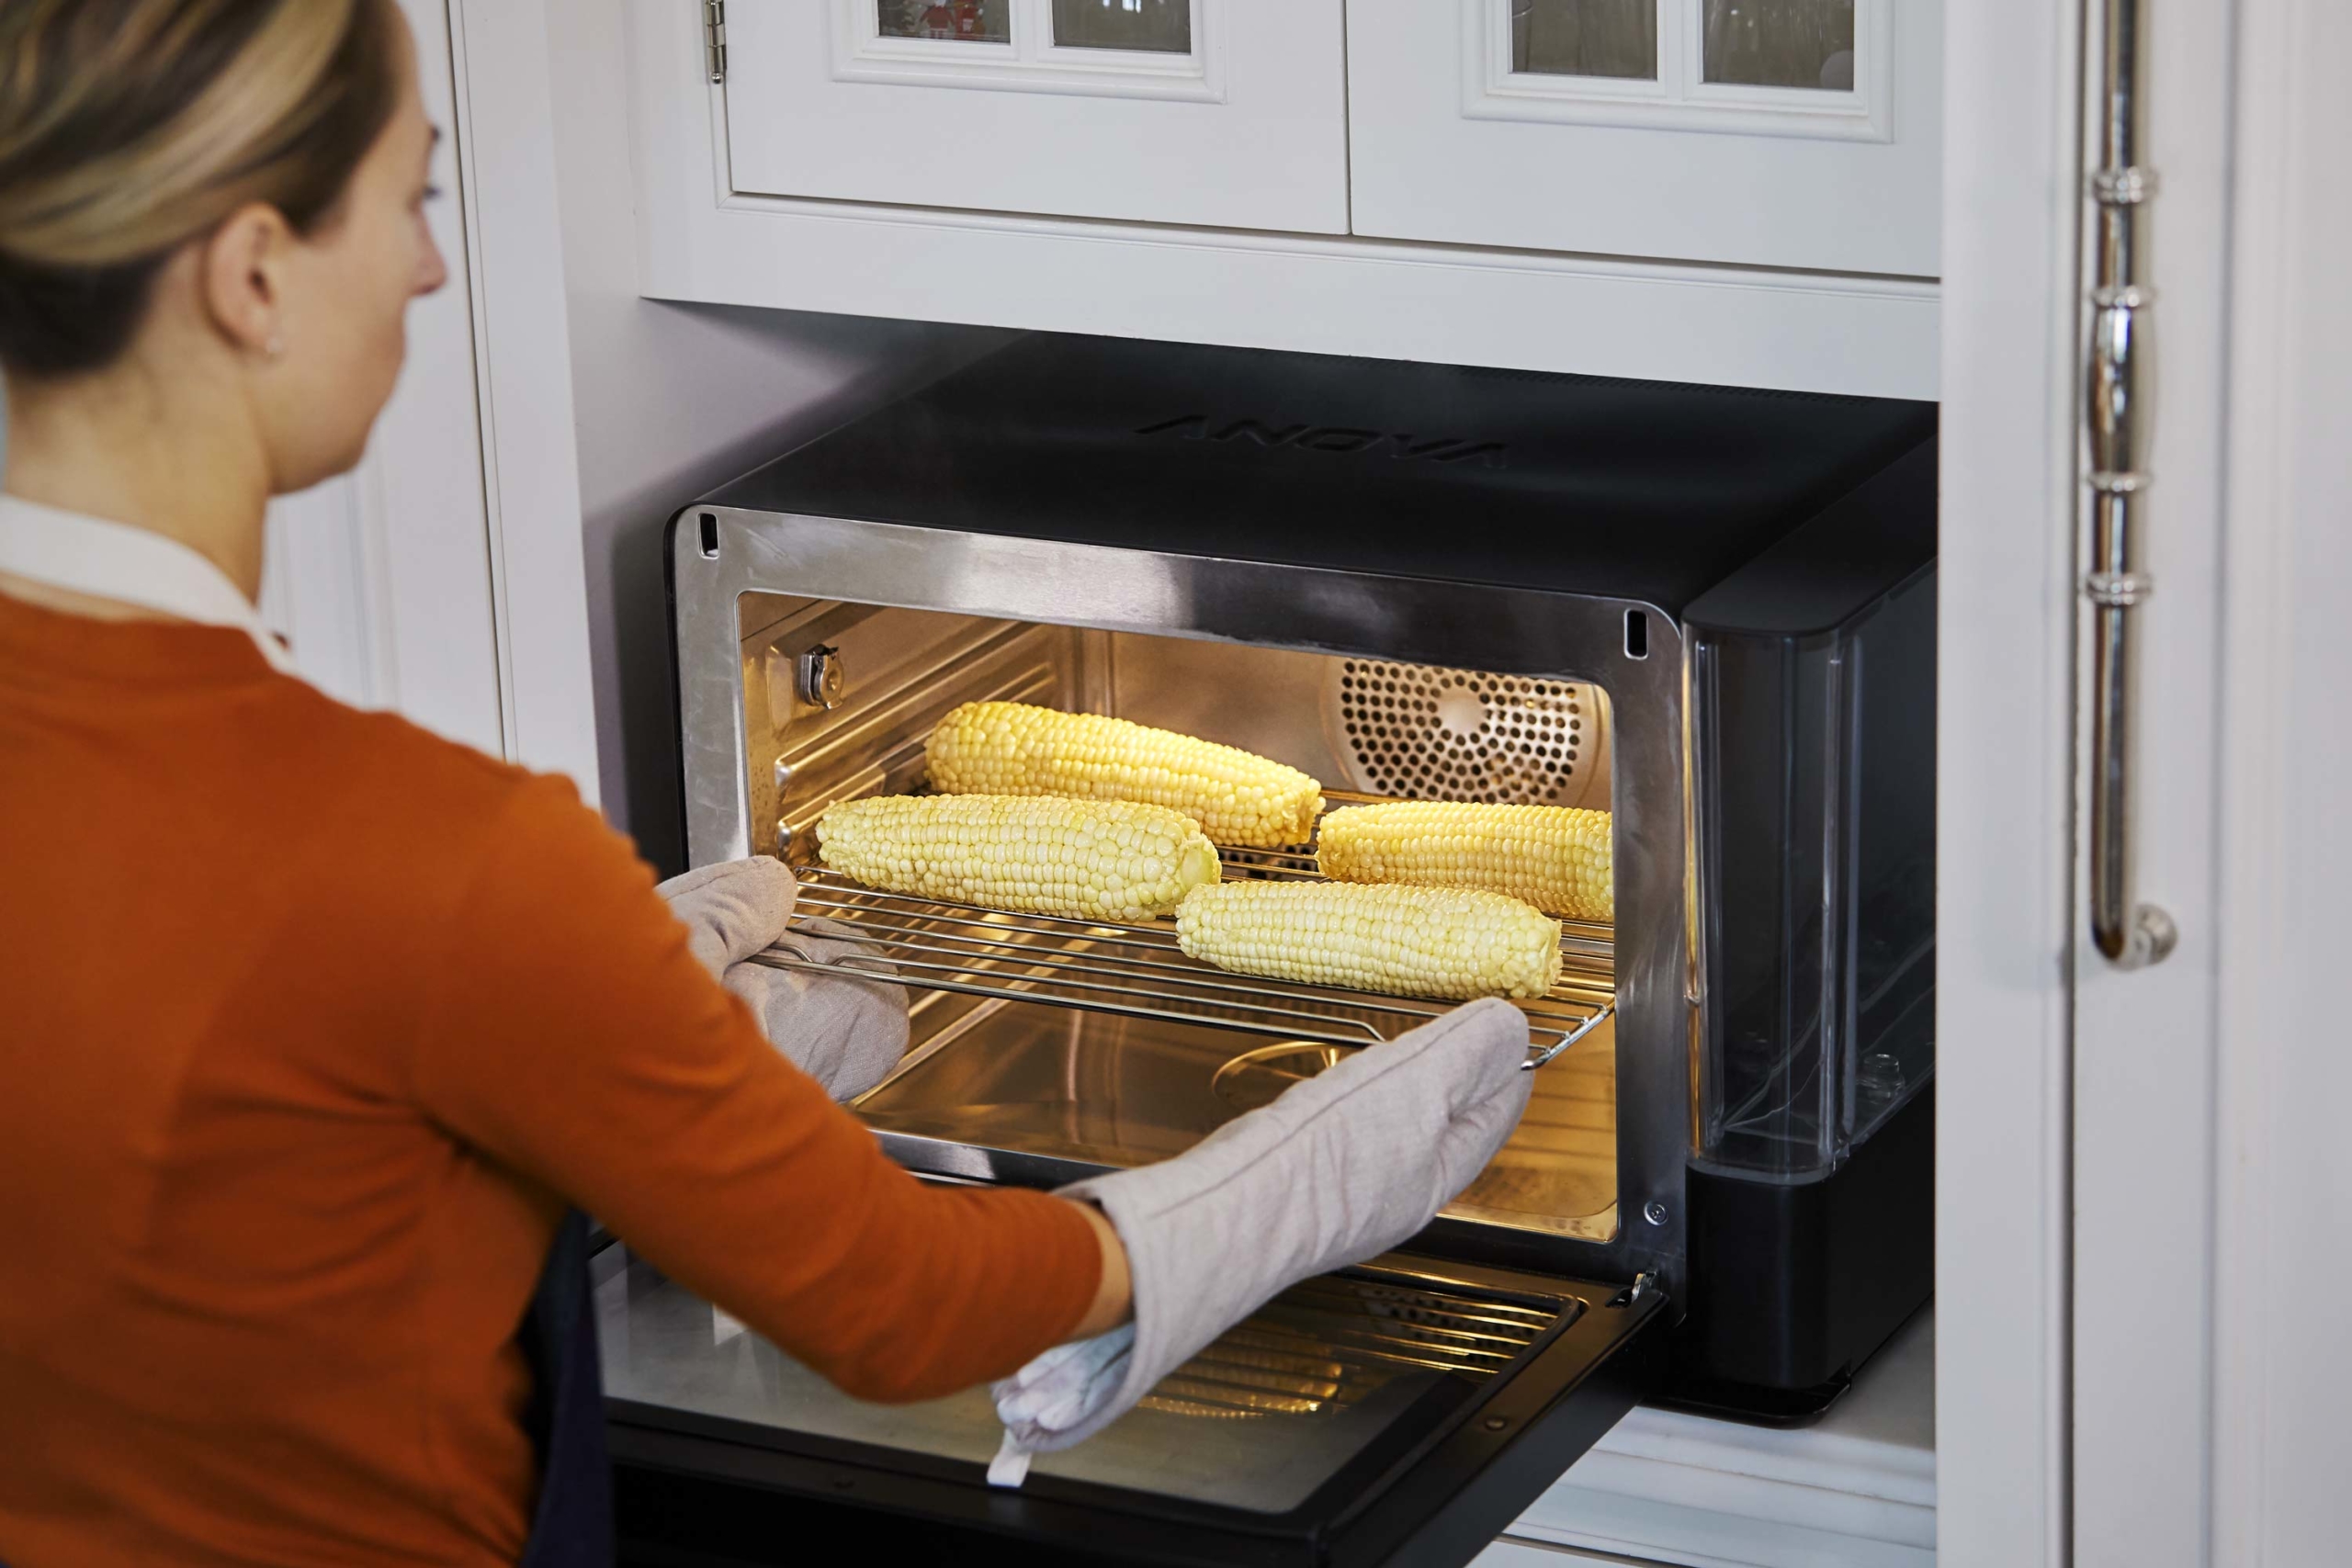 Never Overcook Foods Again With the Anova Precision Oven